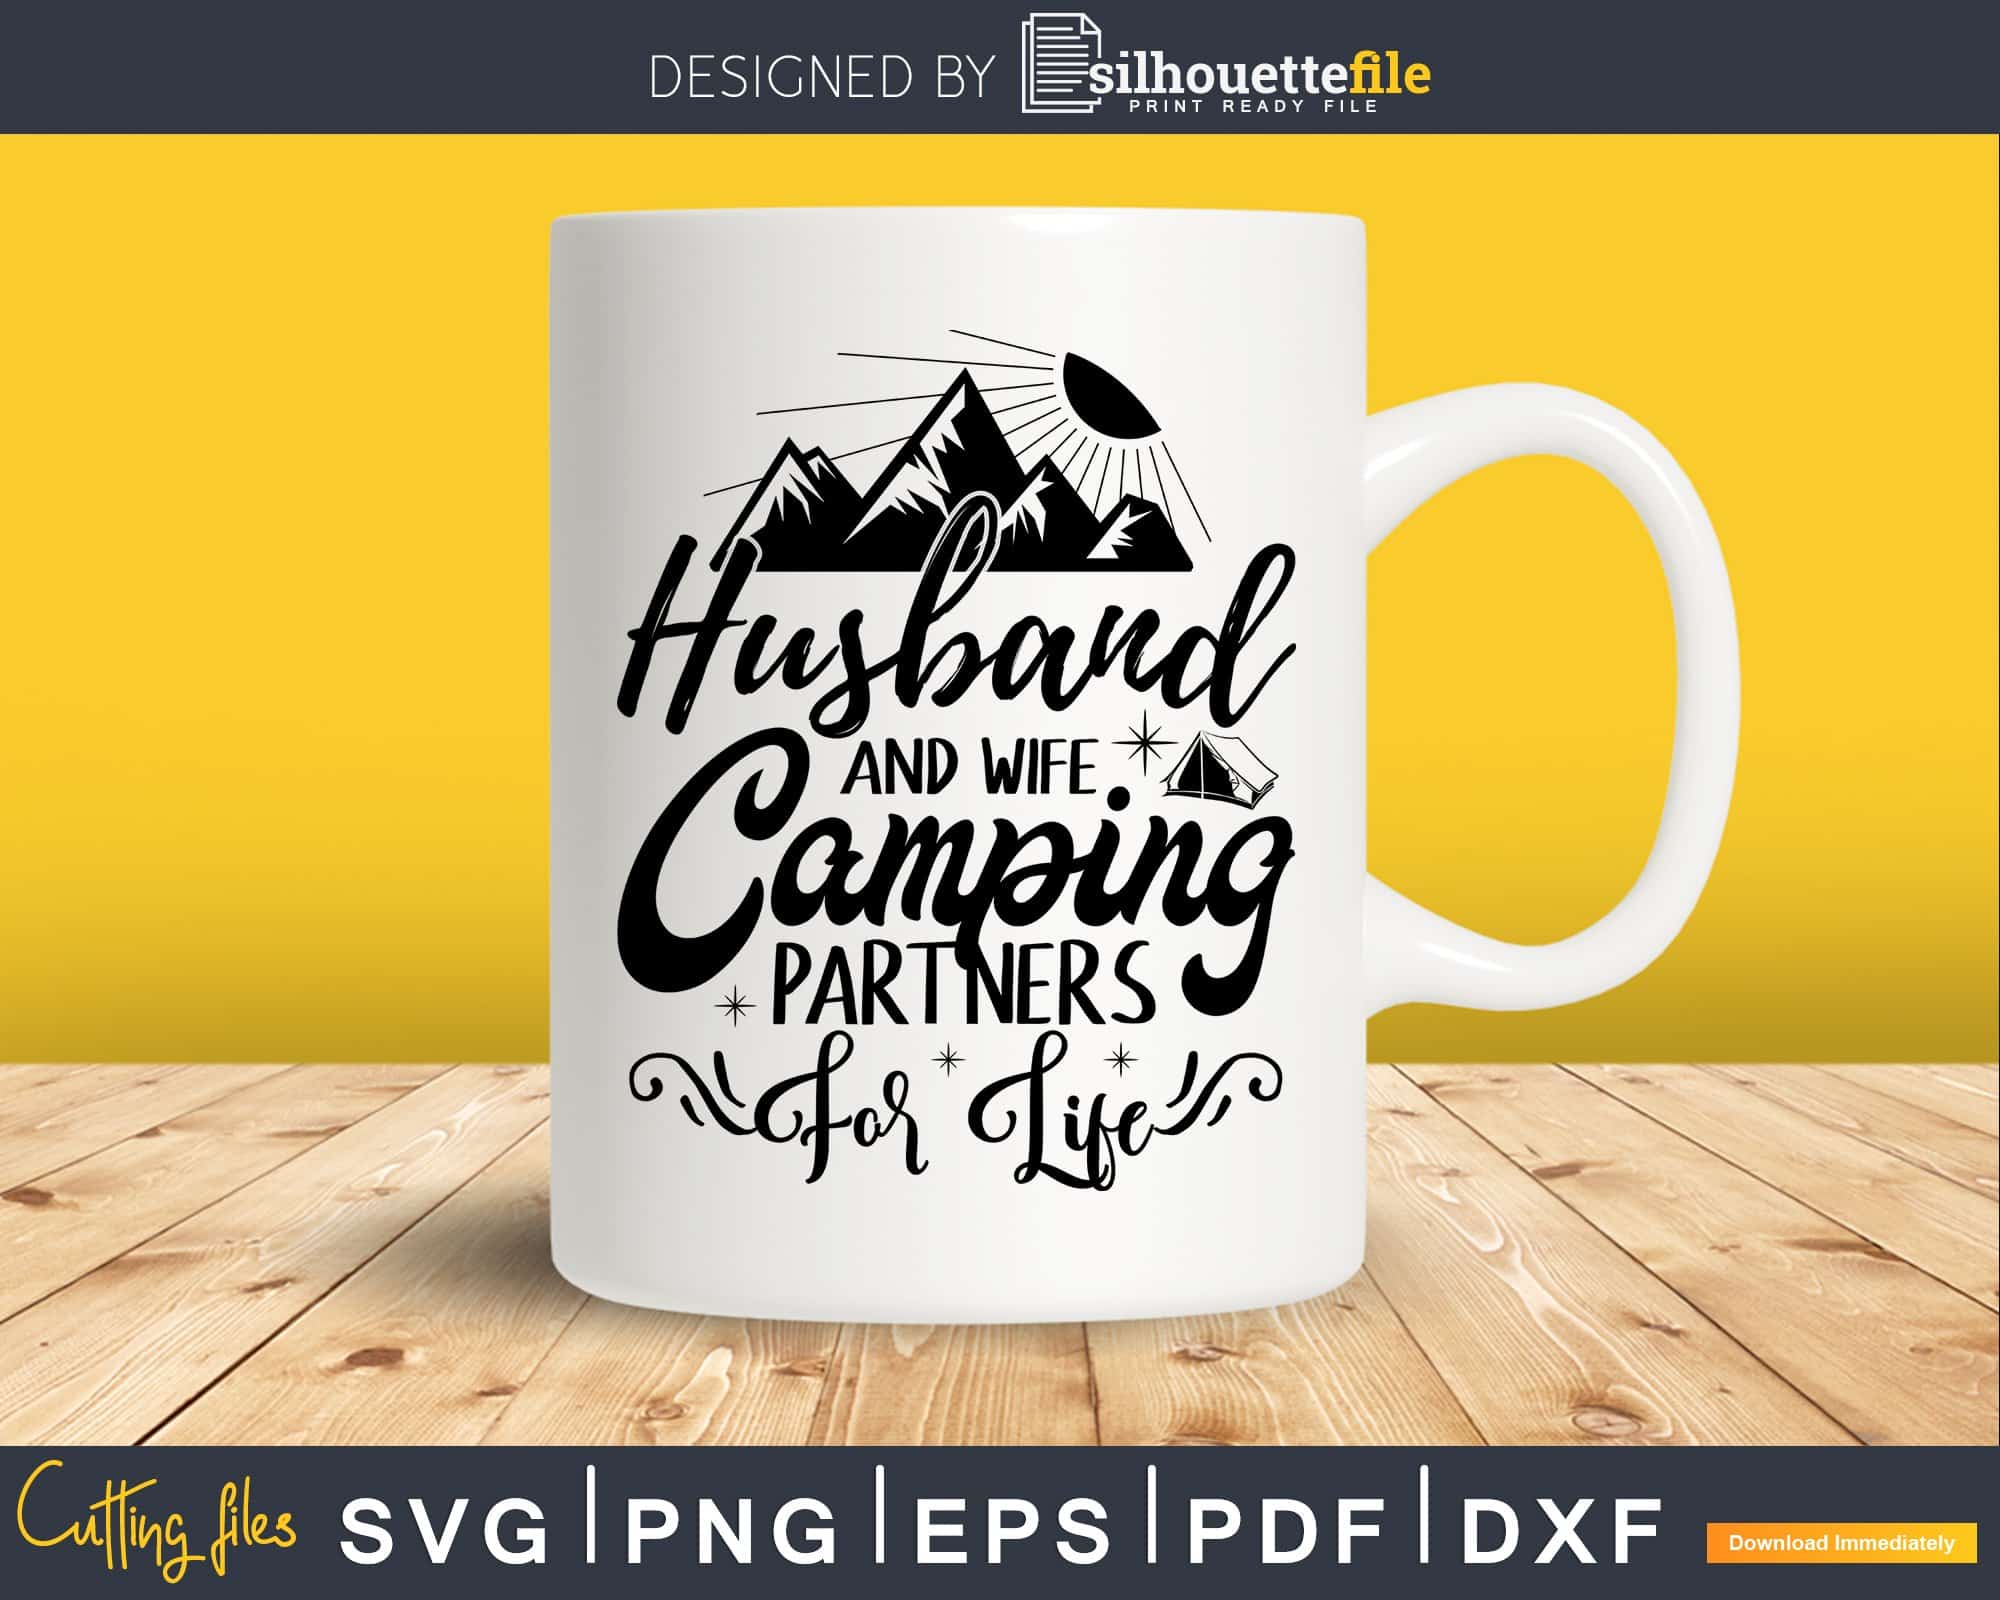 https://cdn.shopify.com/s/files/1/0356/6554/3307/products/husband-and-wife-camping-partners-for-life-camper-svg-cut-silhouettefile-788.jpg